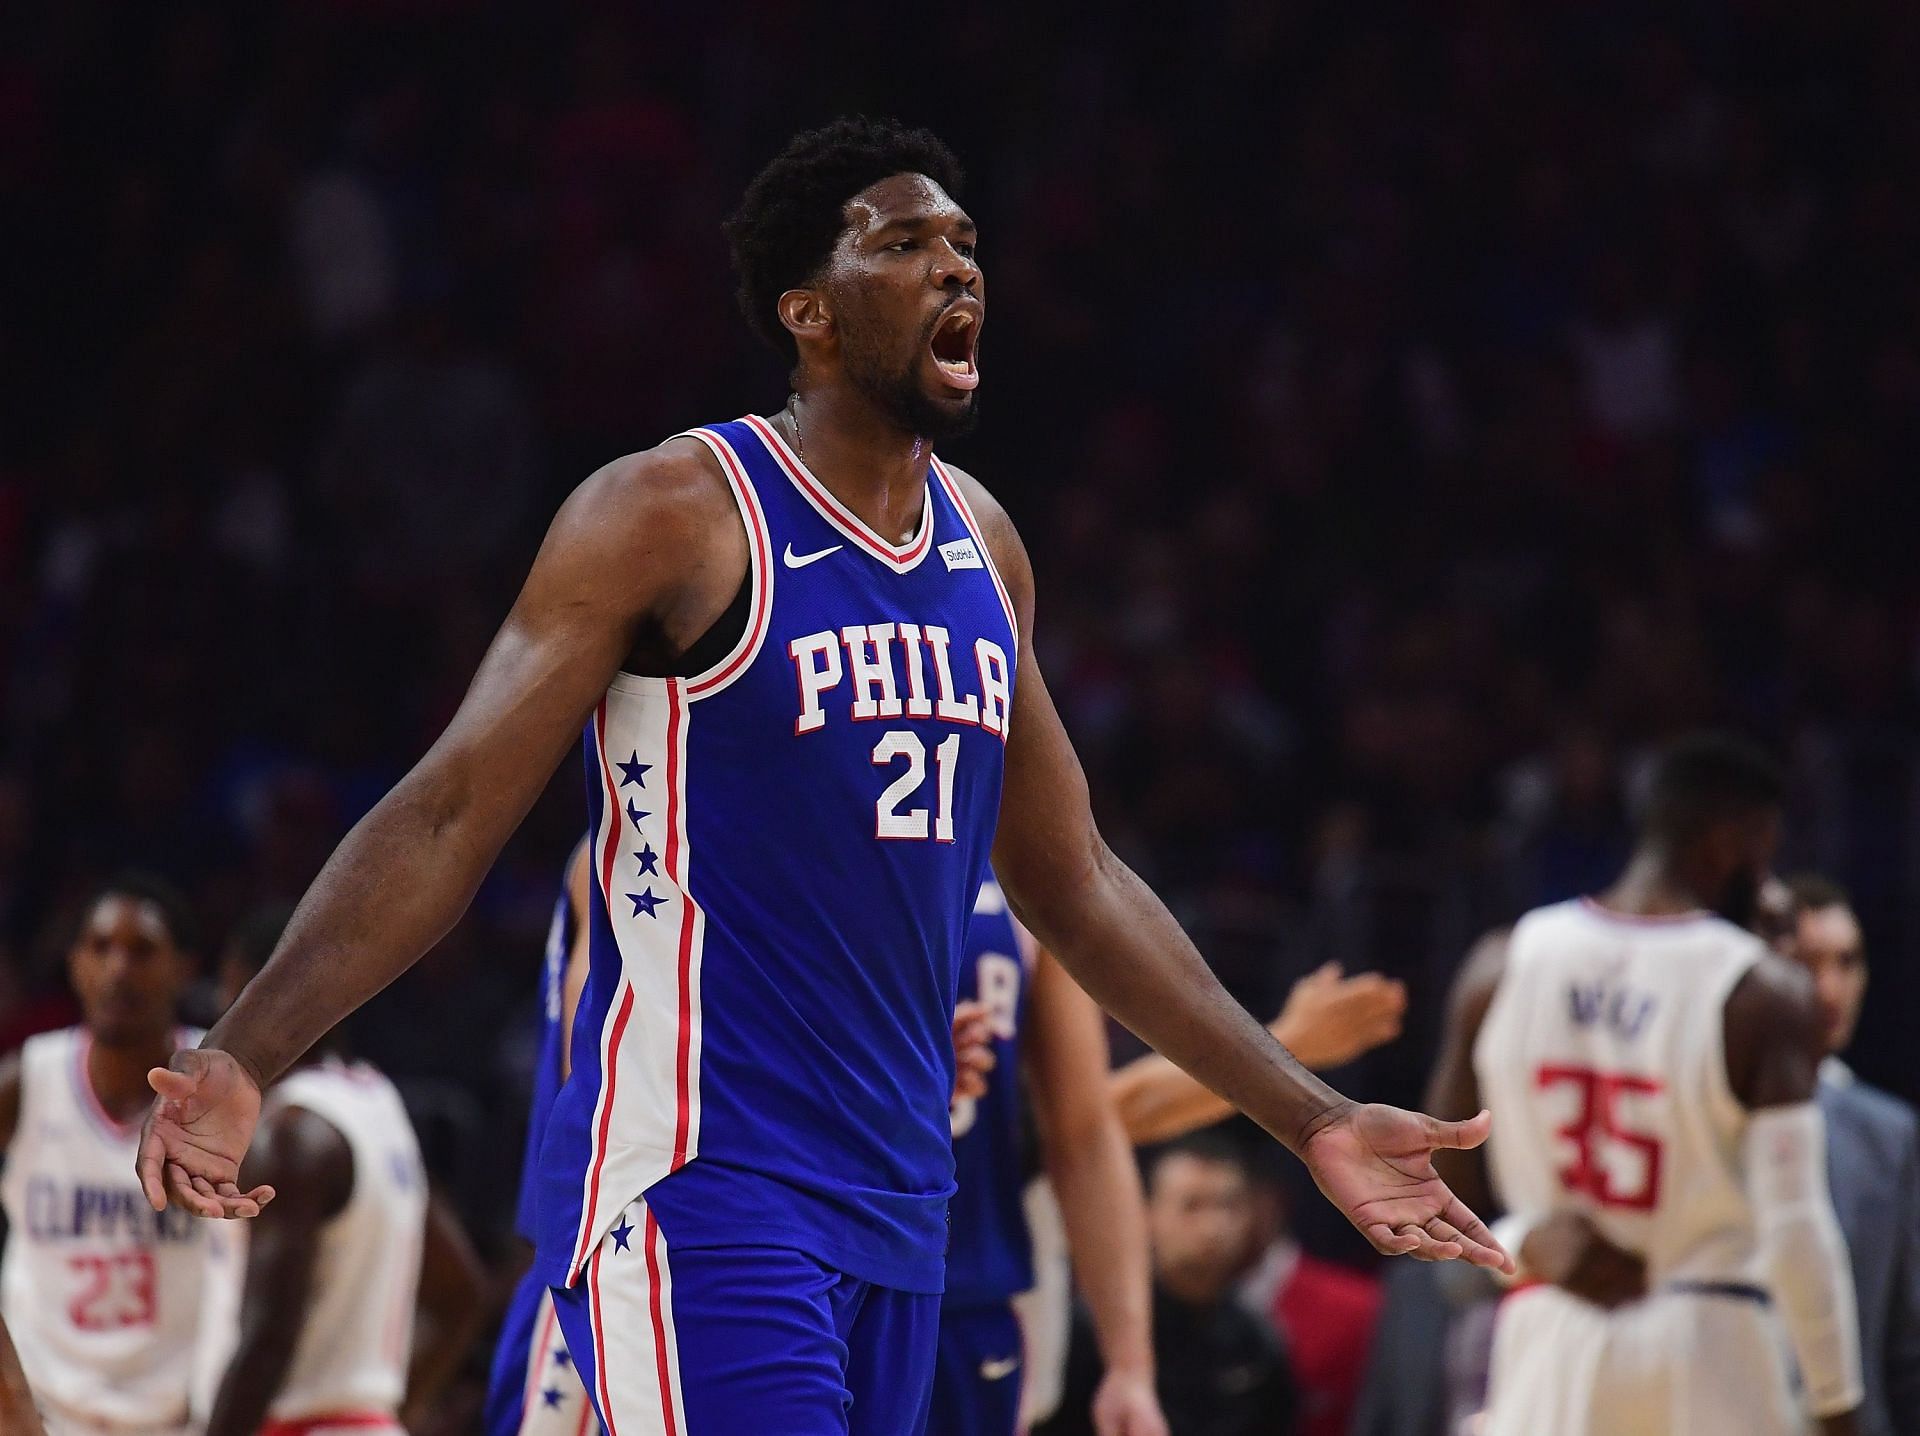 The Philadelphia 76ers will host the LA Clippers on January 21st